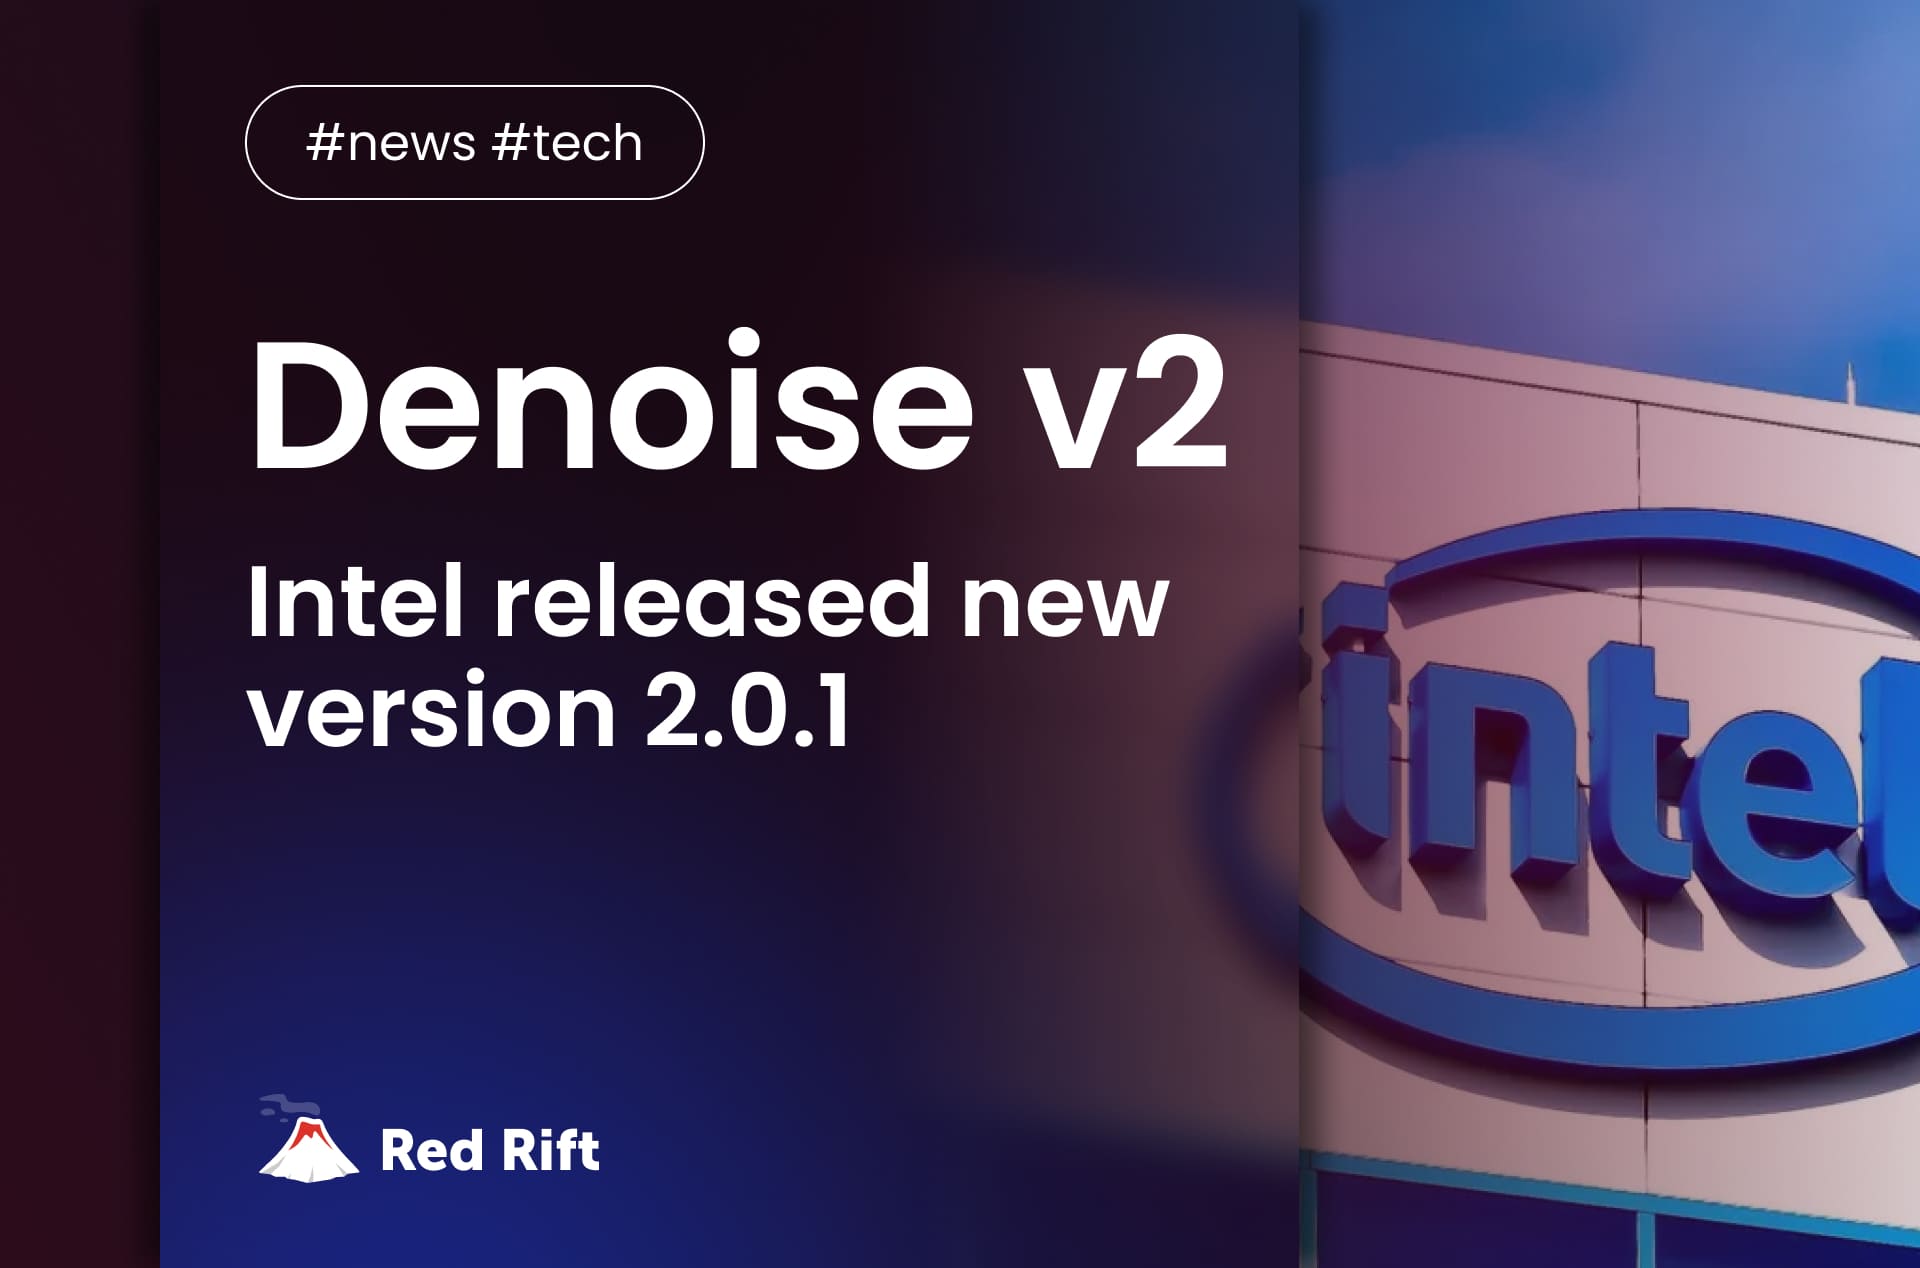 Intel released Open Image Denoise 2.0.1 Image